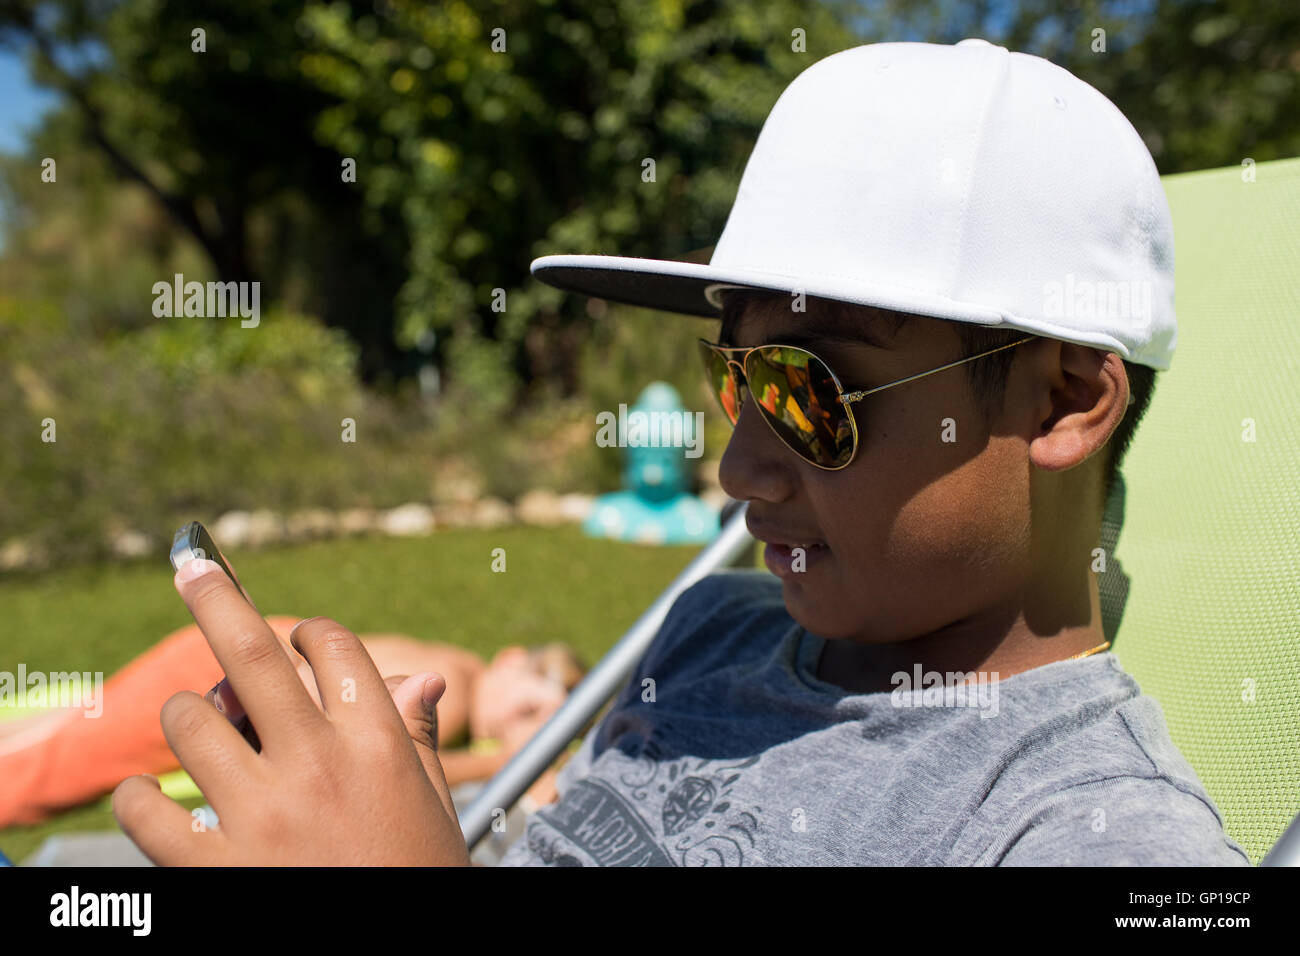 Young boy wearing a white hat watching his smartphone Stock Photo